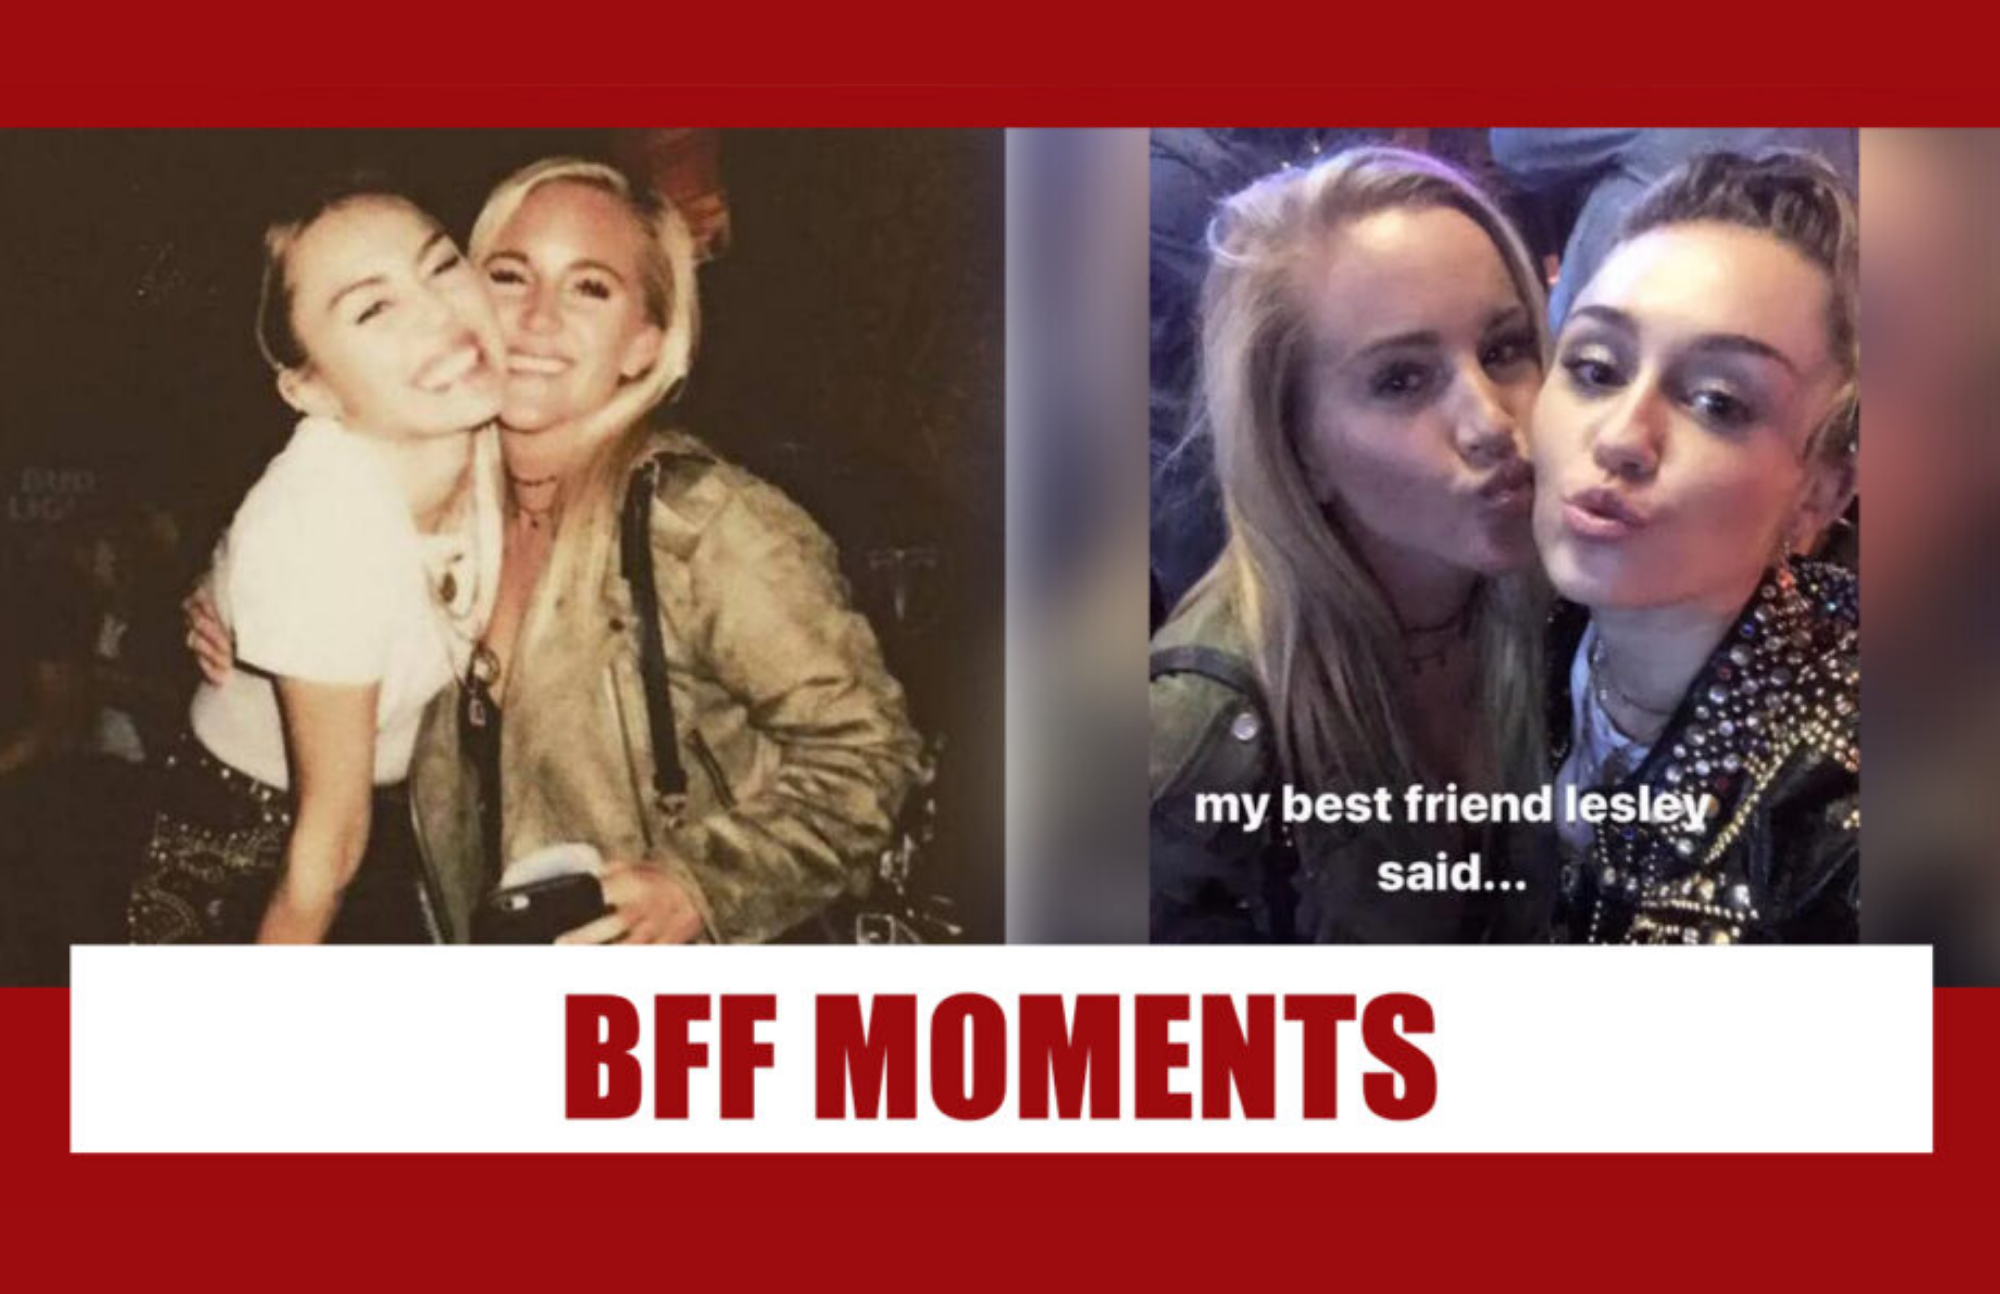 Miley Cyrus and her best friend Lesley Patterson